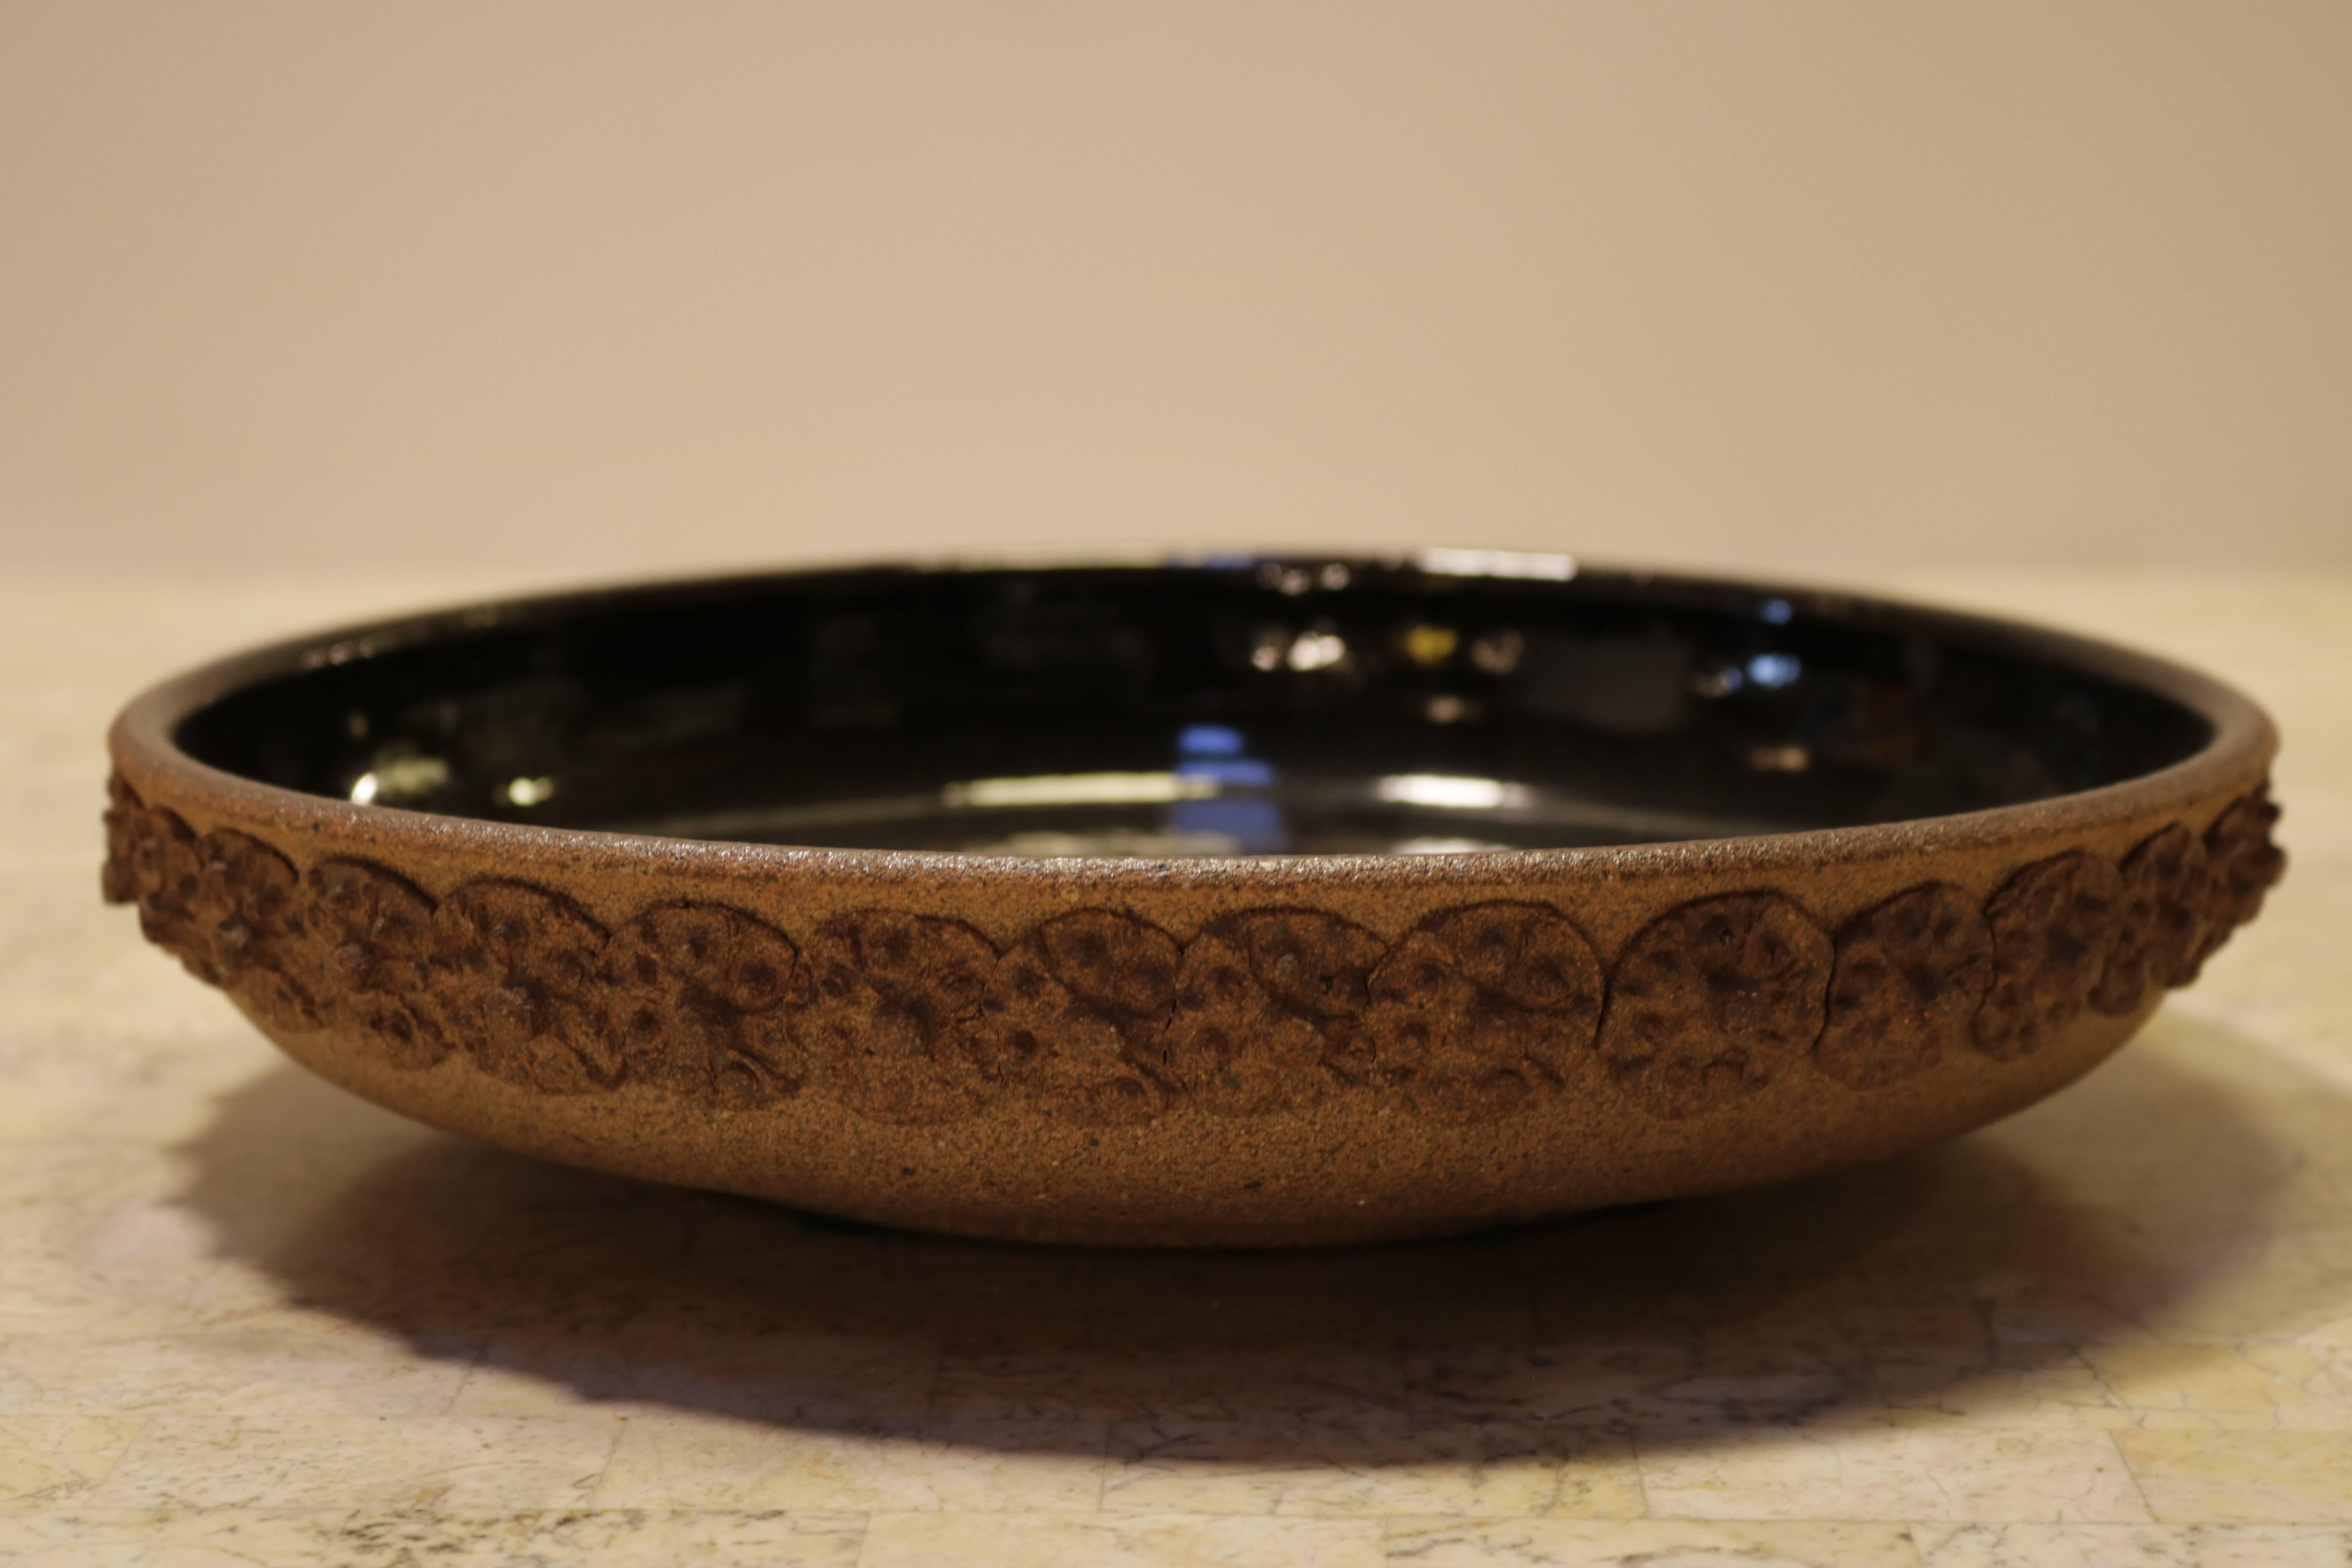 Terracotta decorative bowl is glazed espresso brown inside and a dimensional floral motif. Signed by probably a Californian artist but is illegible.